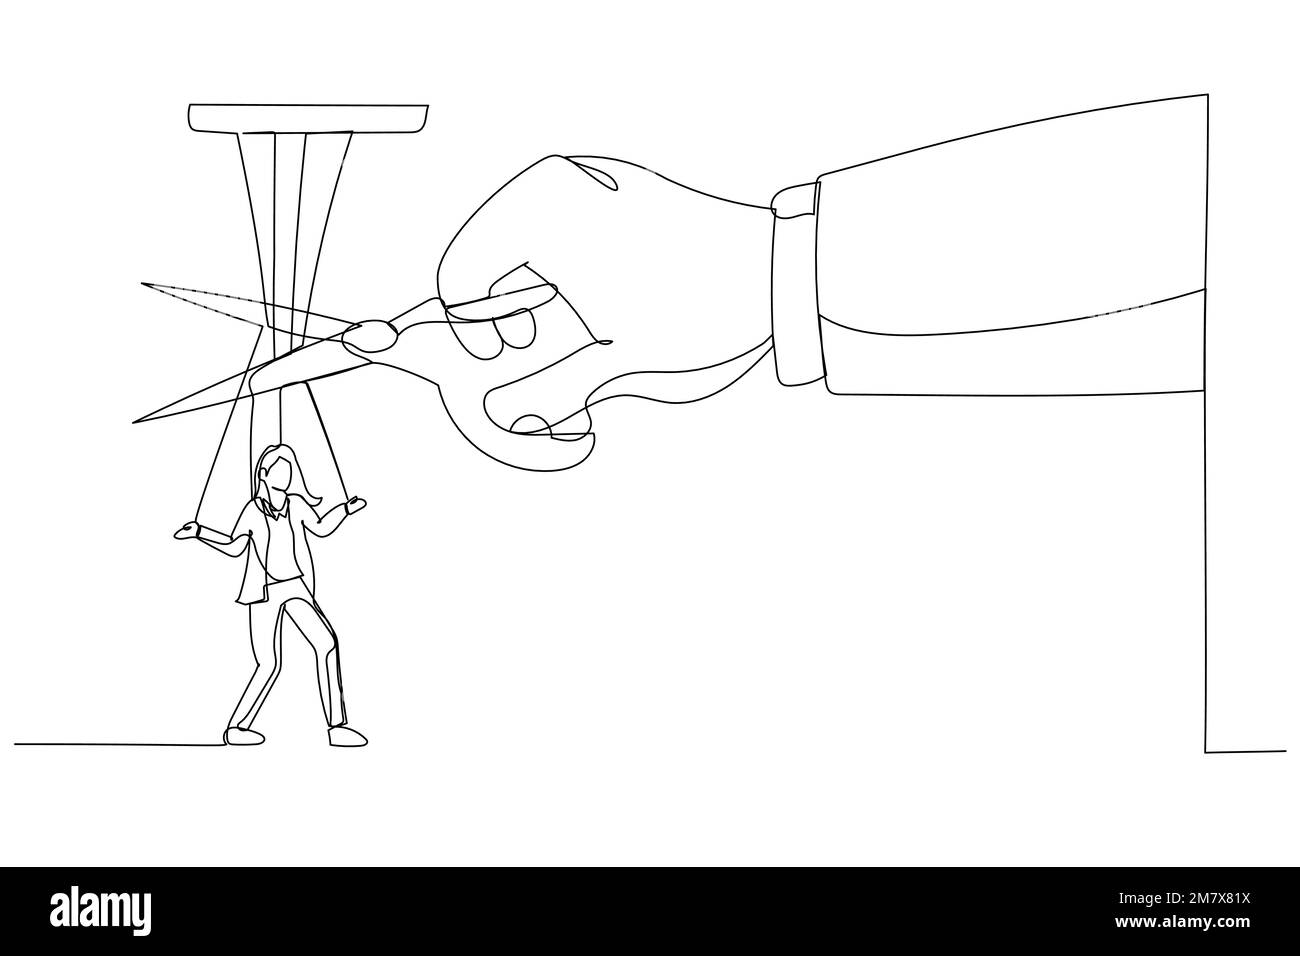 Cartoon of giant hand with scissors cutting the strings attached to businesswoman. Metaphor for freedom, independent, liberation. Single line art styl Stock Vector